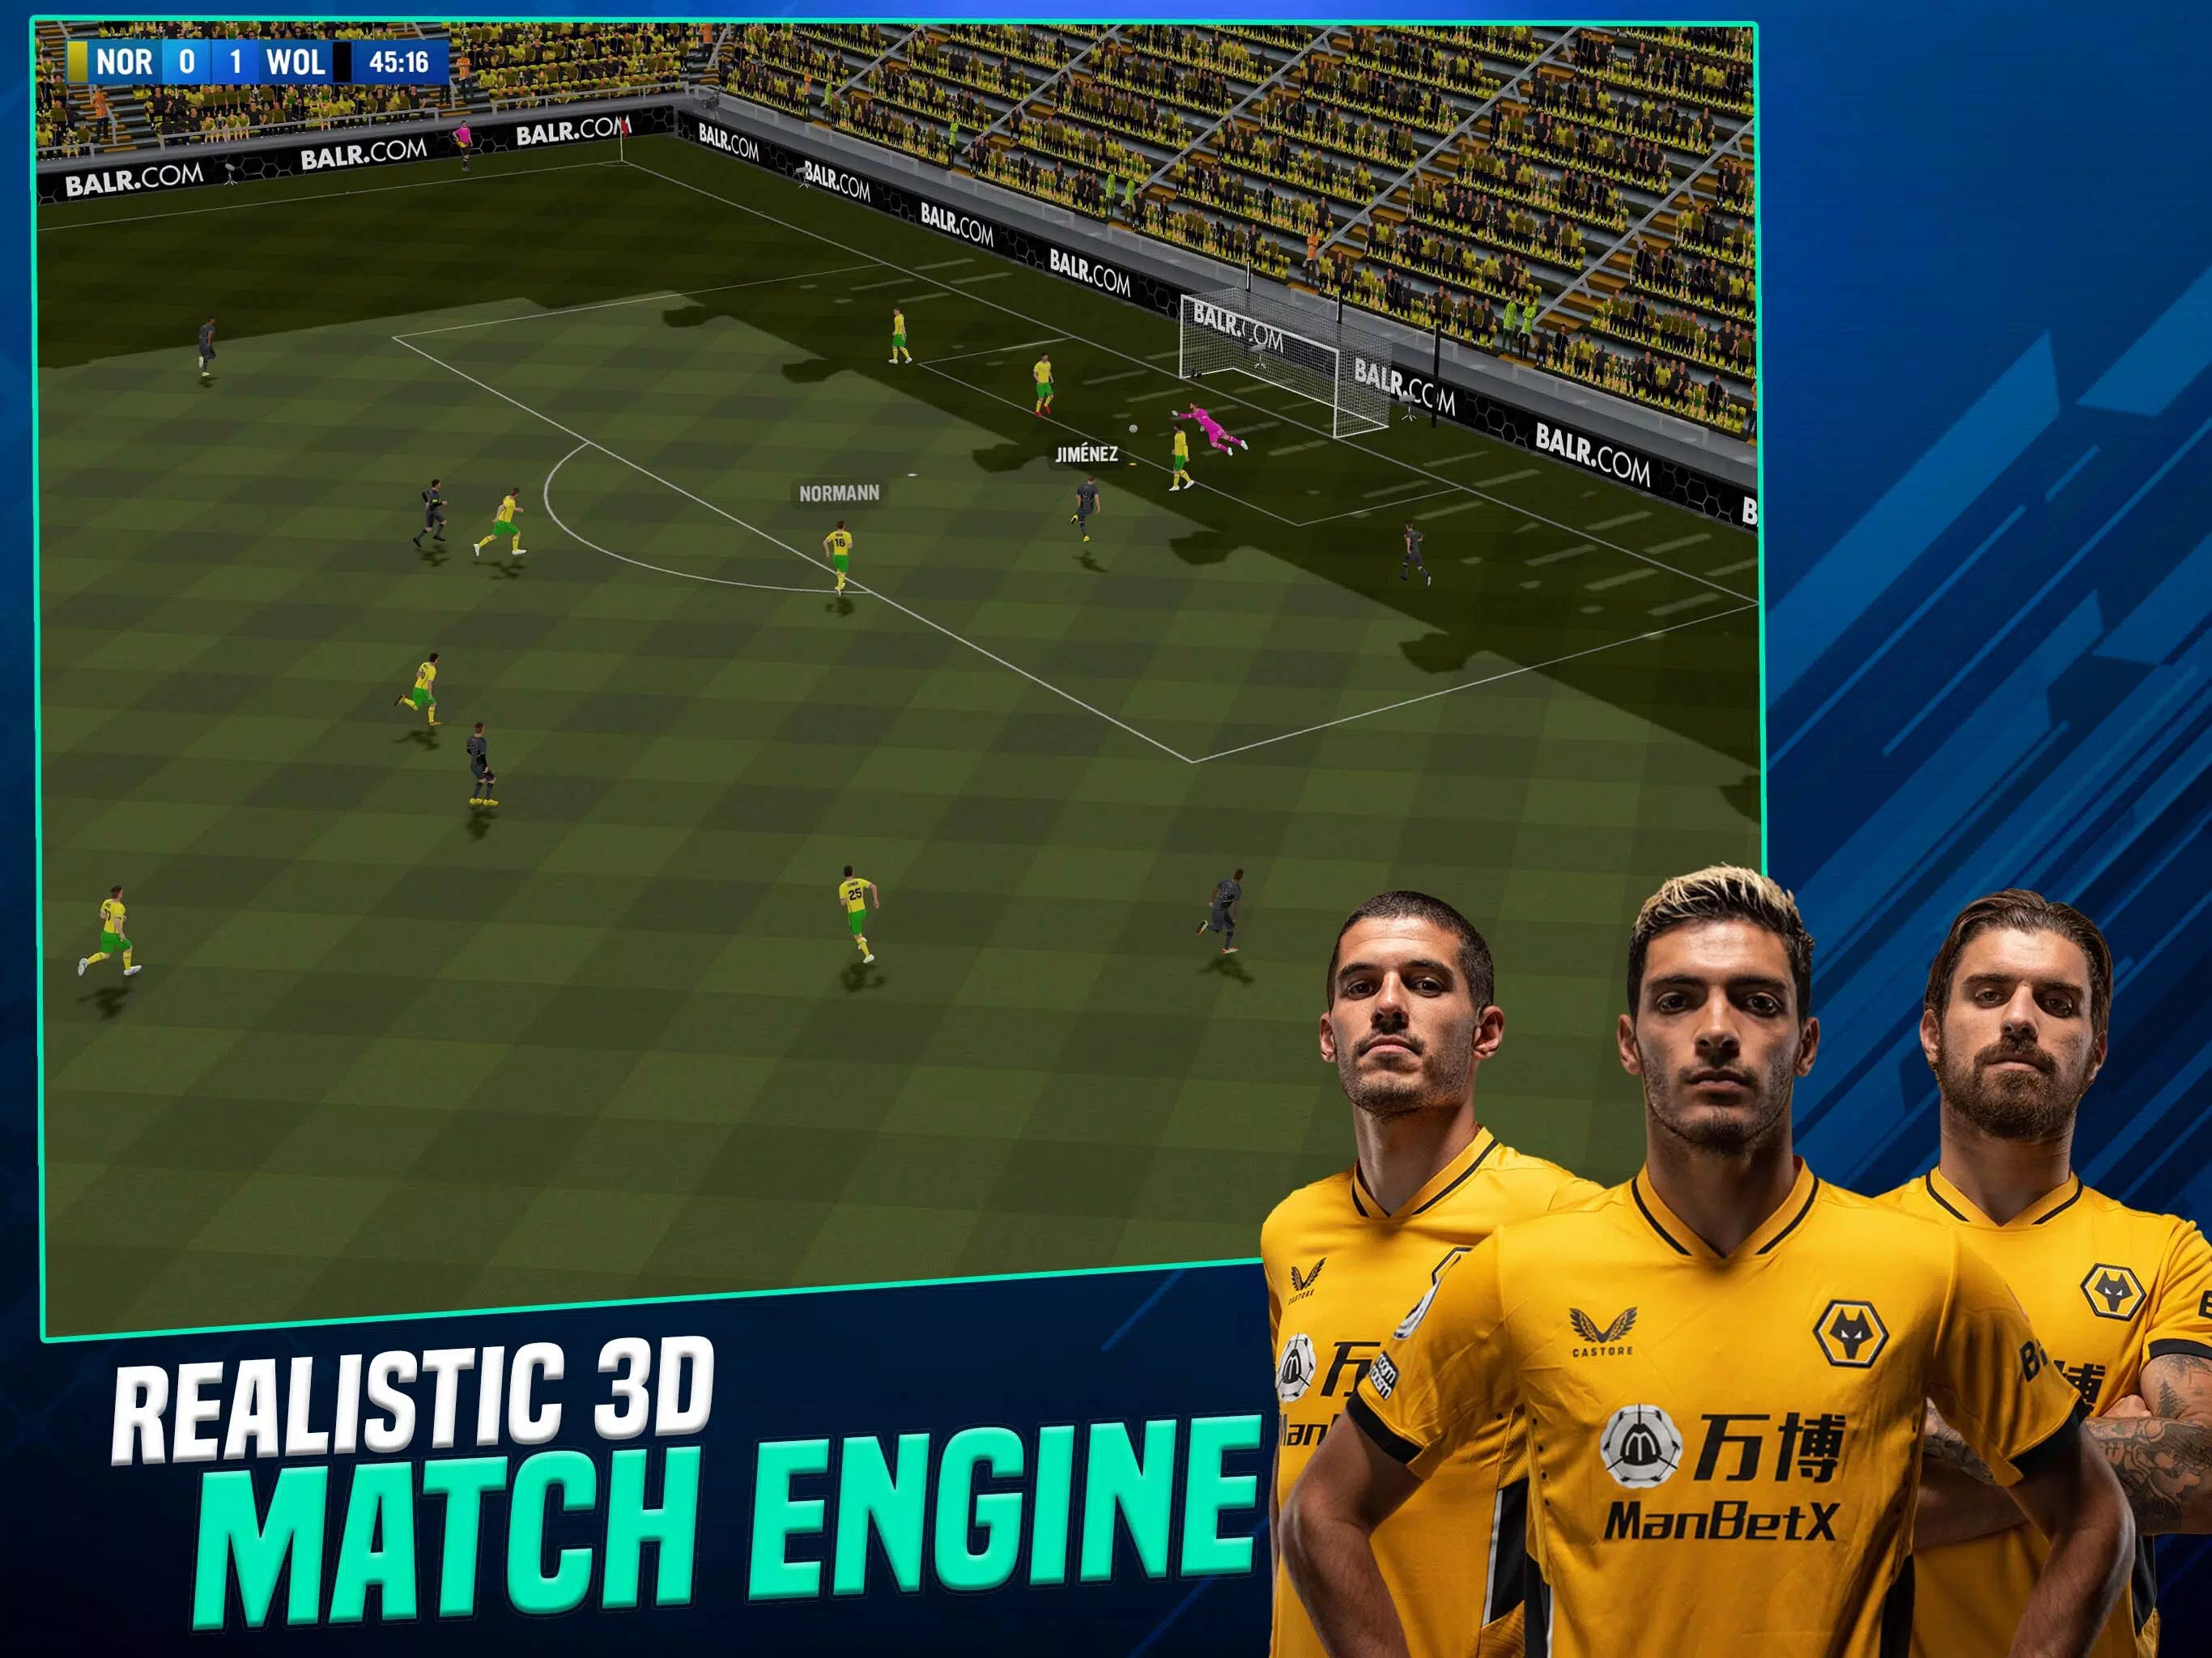 Download FIFA Football 23: Beta v18.9.03 APK (Latest) for Android